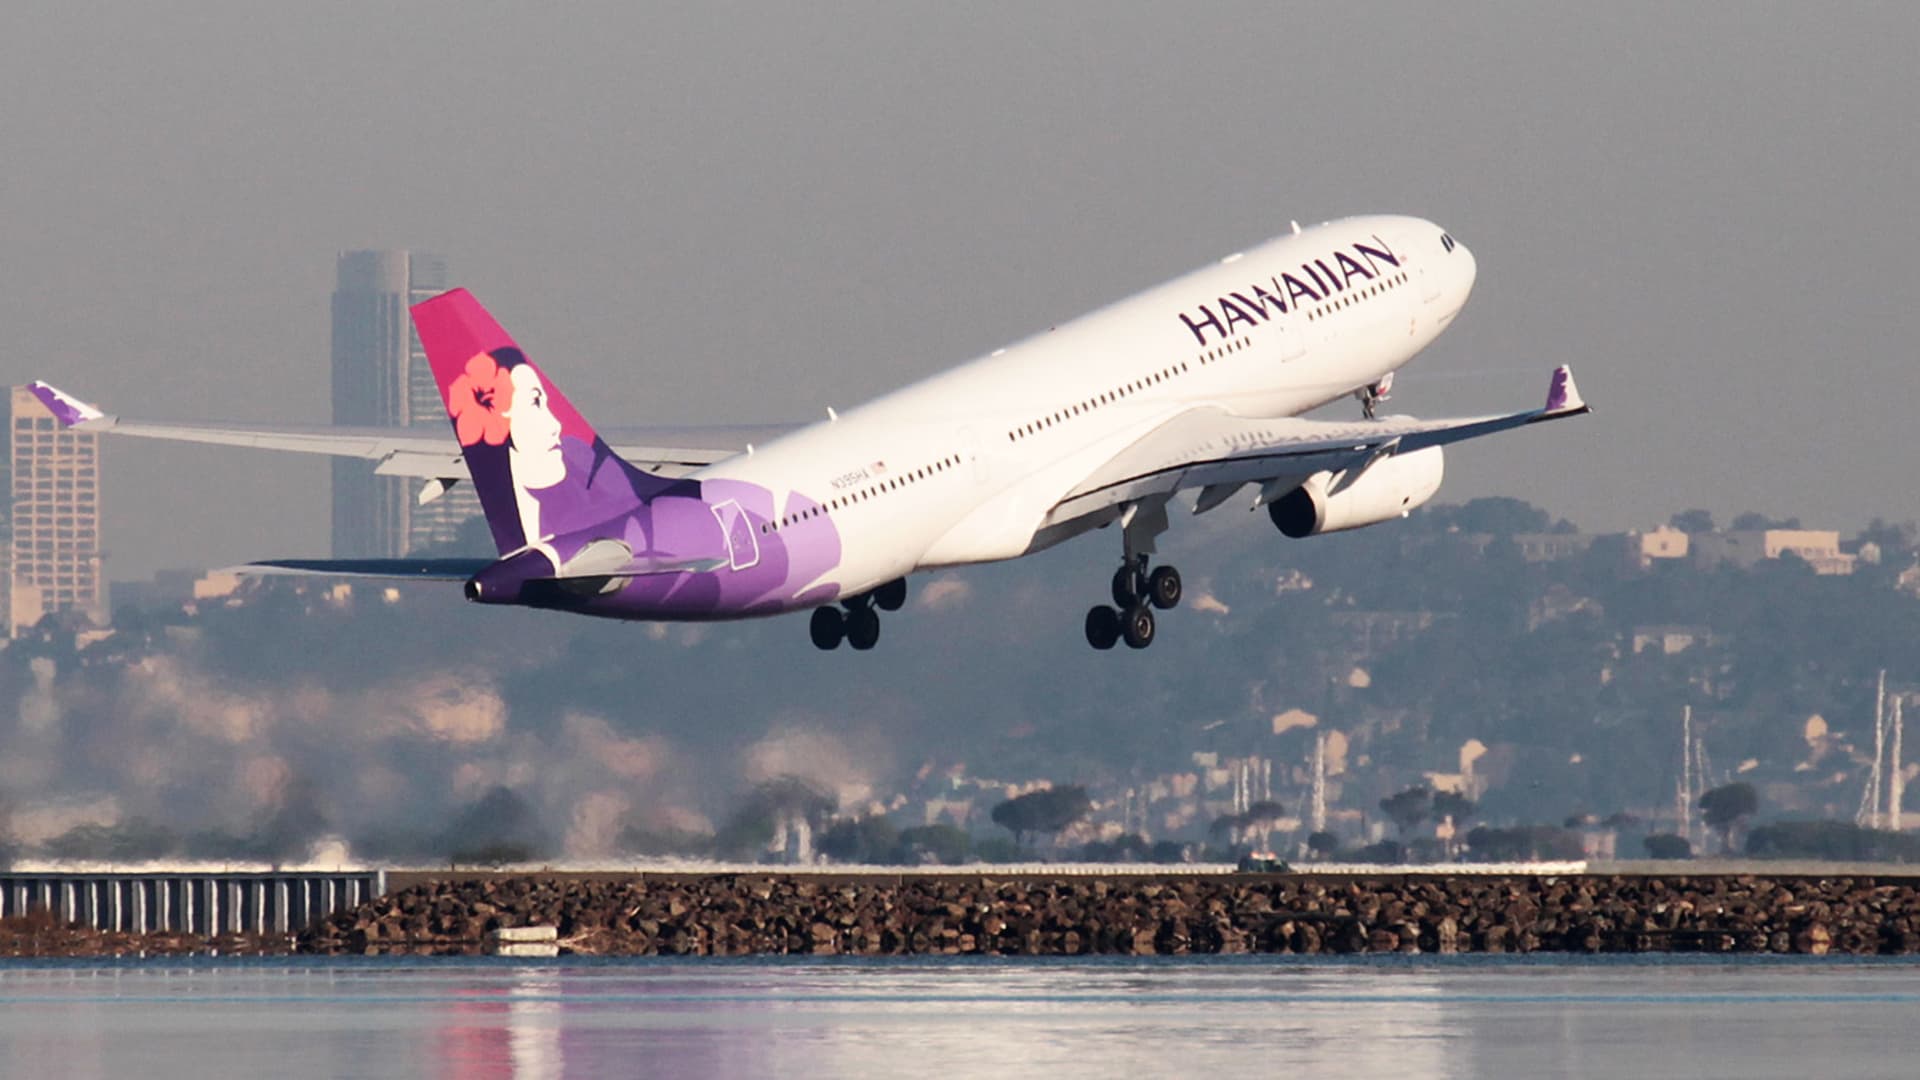 SpaceX’s Starlink to provide Wi-Fi on Hawaiian Airlines flights with free service for passengers